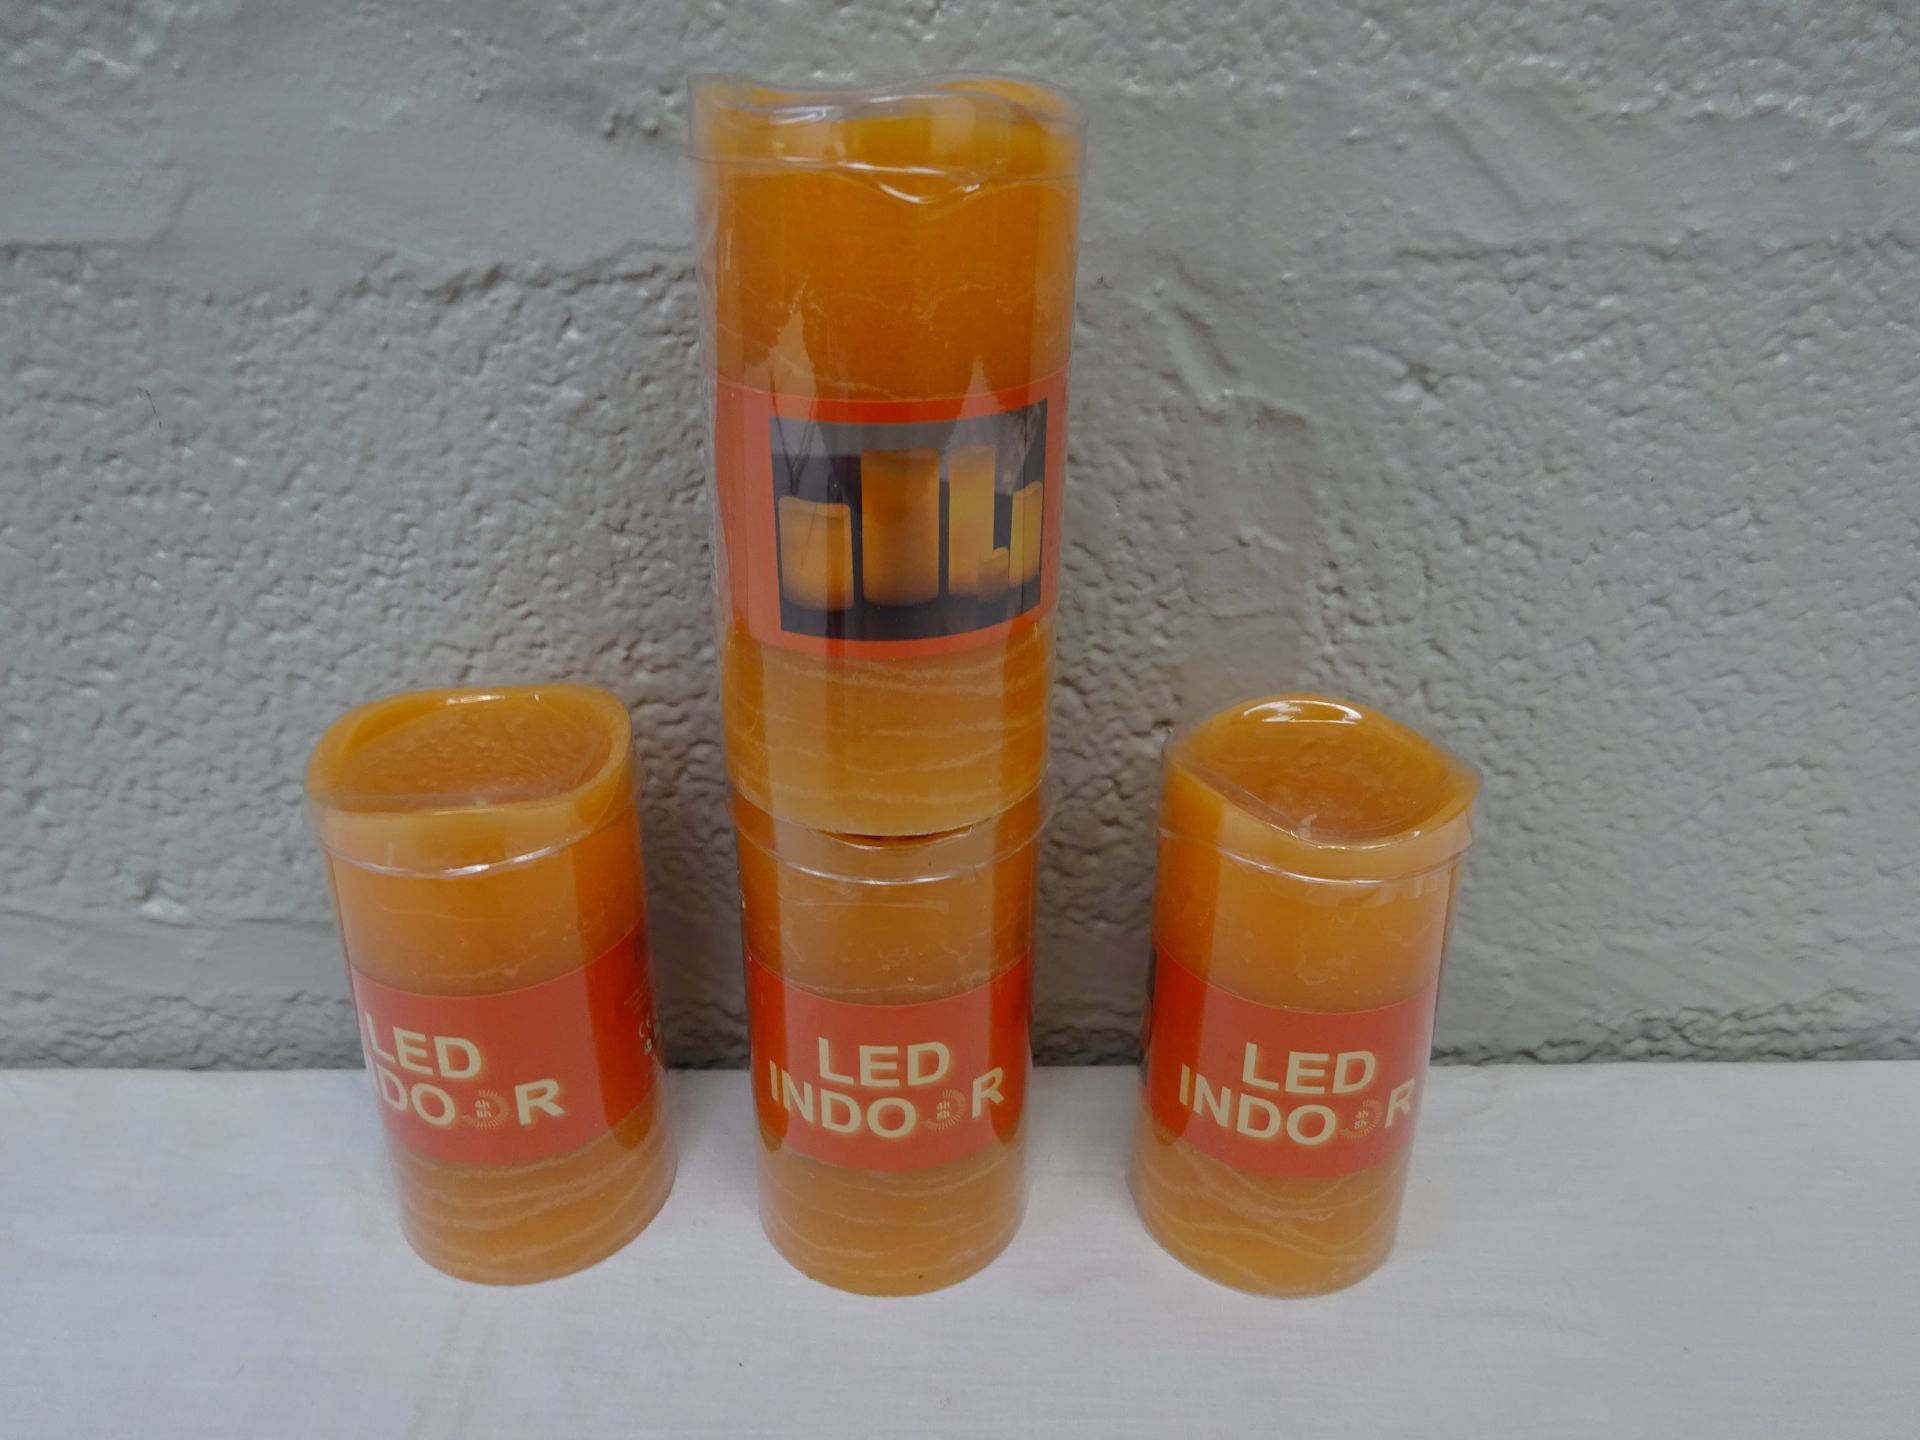 BRAND NEW X4 ORANGE WAX LED INDOOR BATTERY POWERED CANDLES.